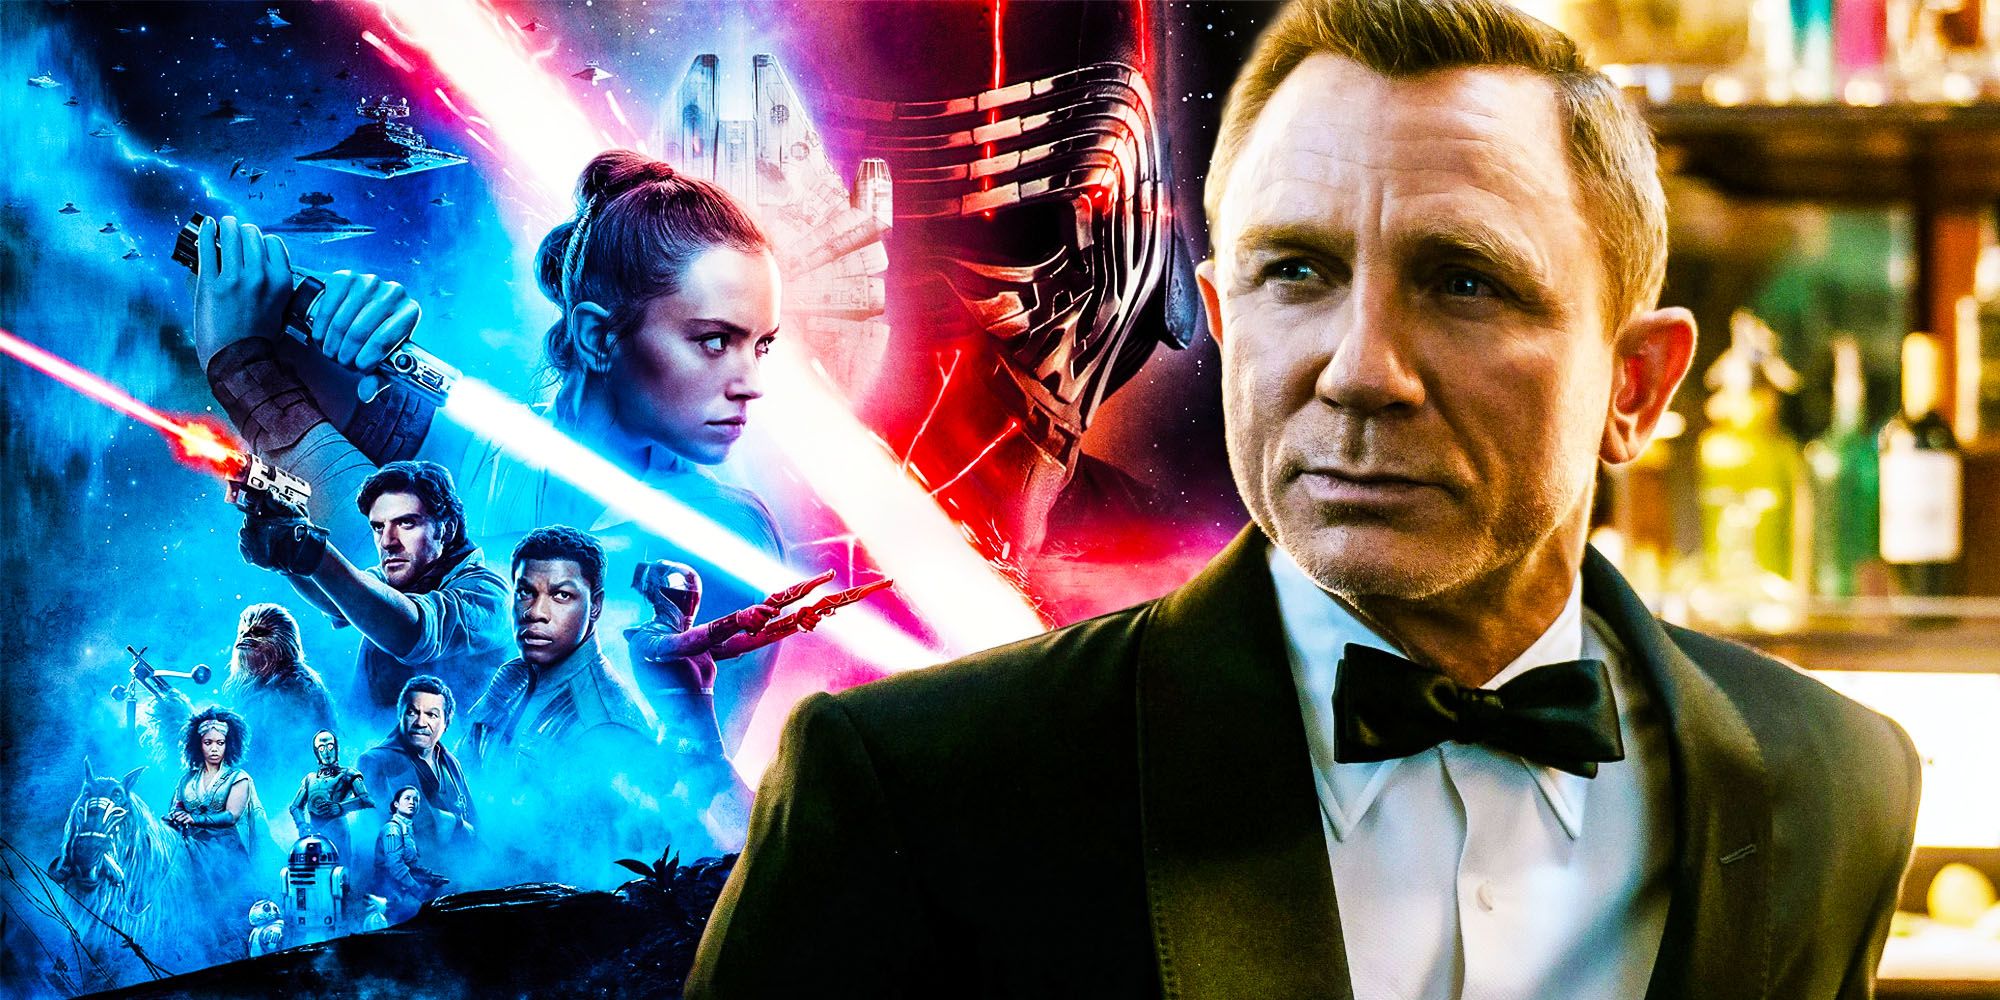 No time to die james bond star wars the rise of skywalker